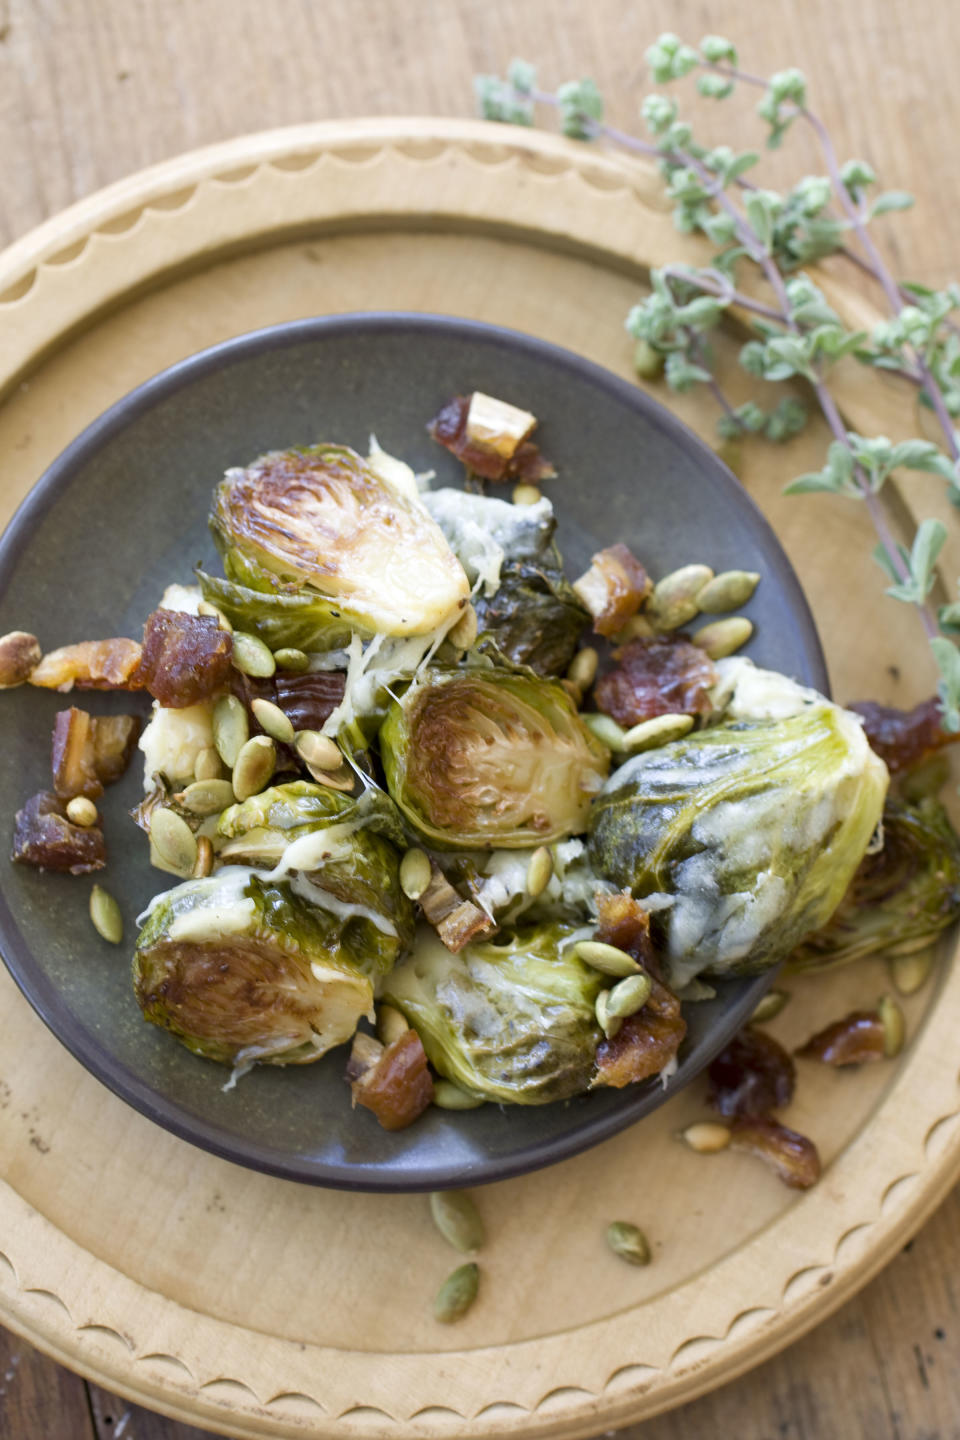 This Oct. 14, 2013 photo shows Gruyere roasted brussels sprouts with pepitas and dates in Concord, N.H. (AP Photo/Matthew Mead)